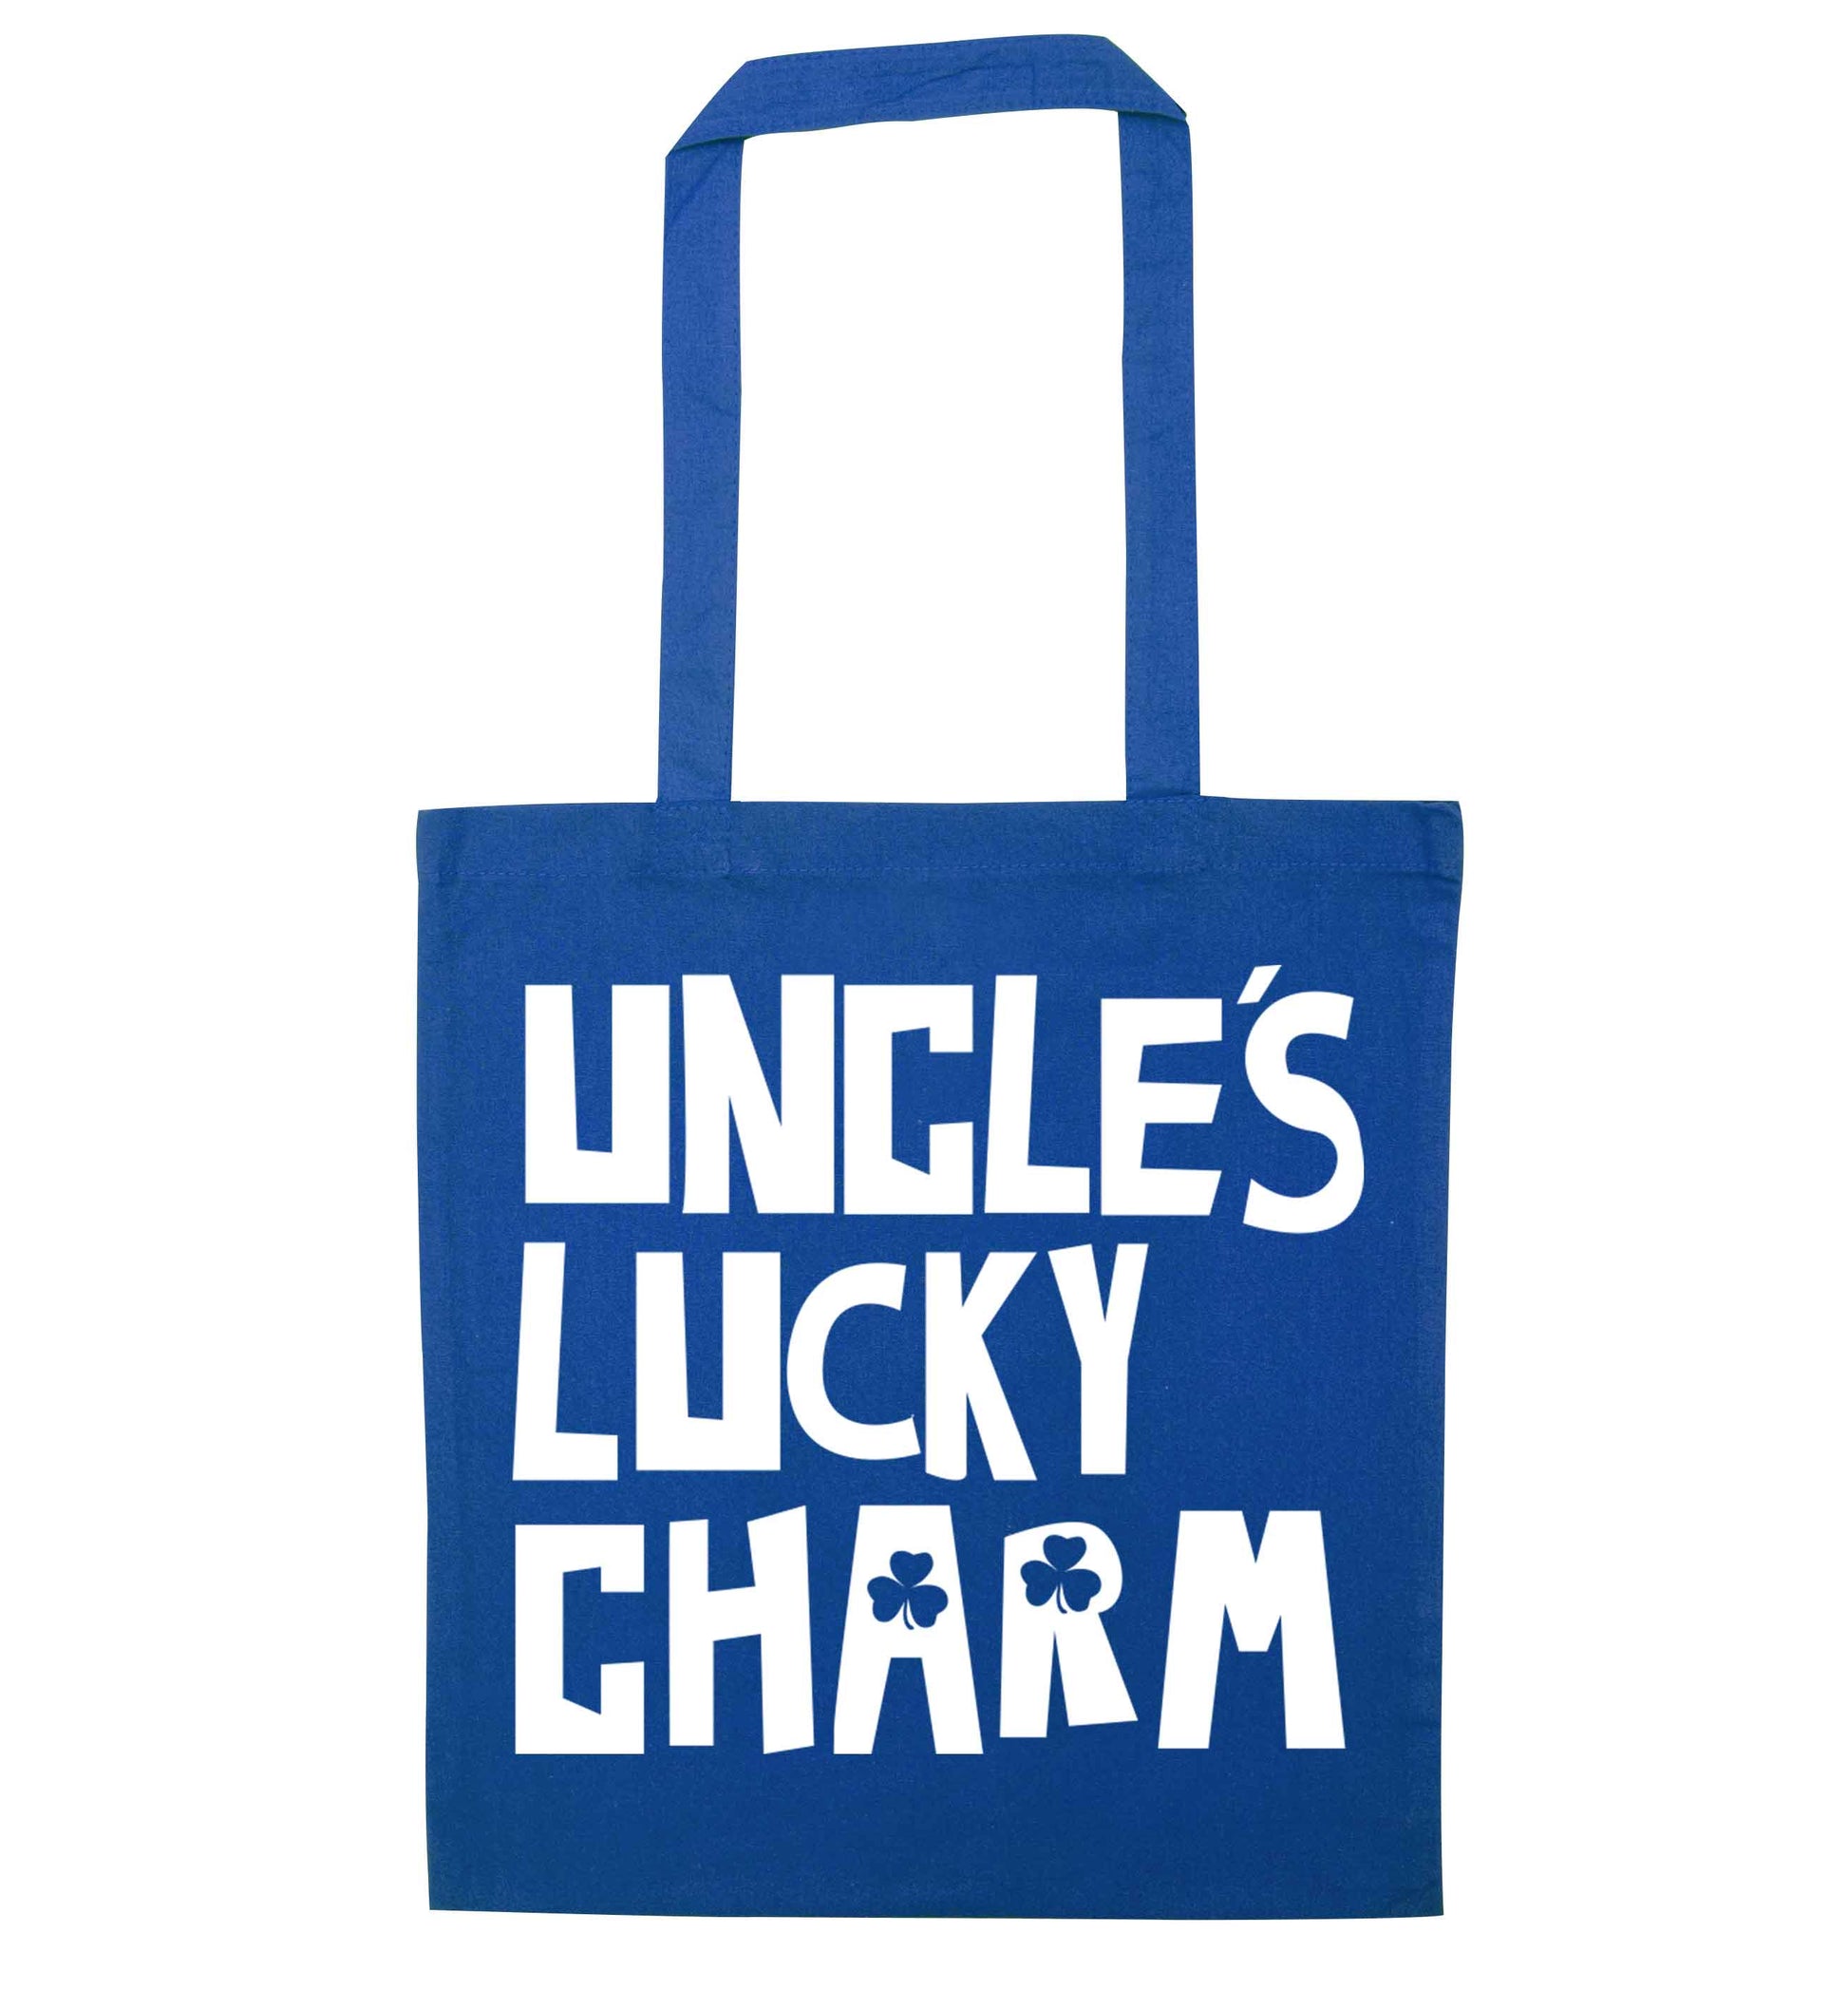 Uncles lucky charm blue tote bag